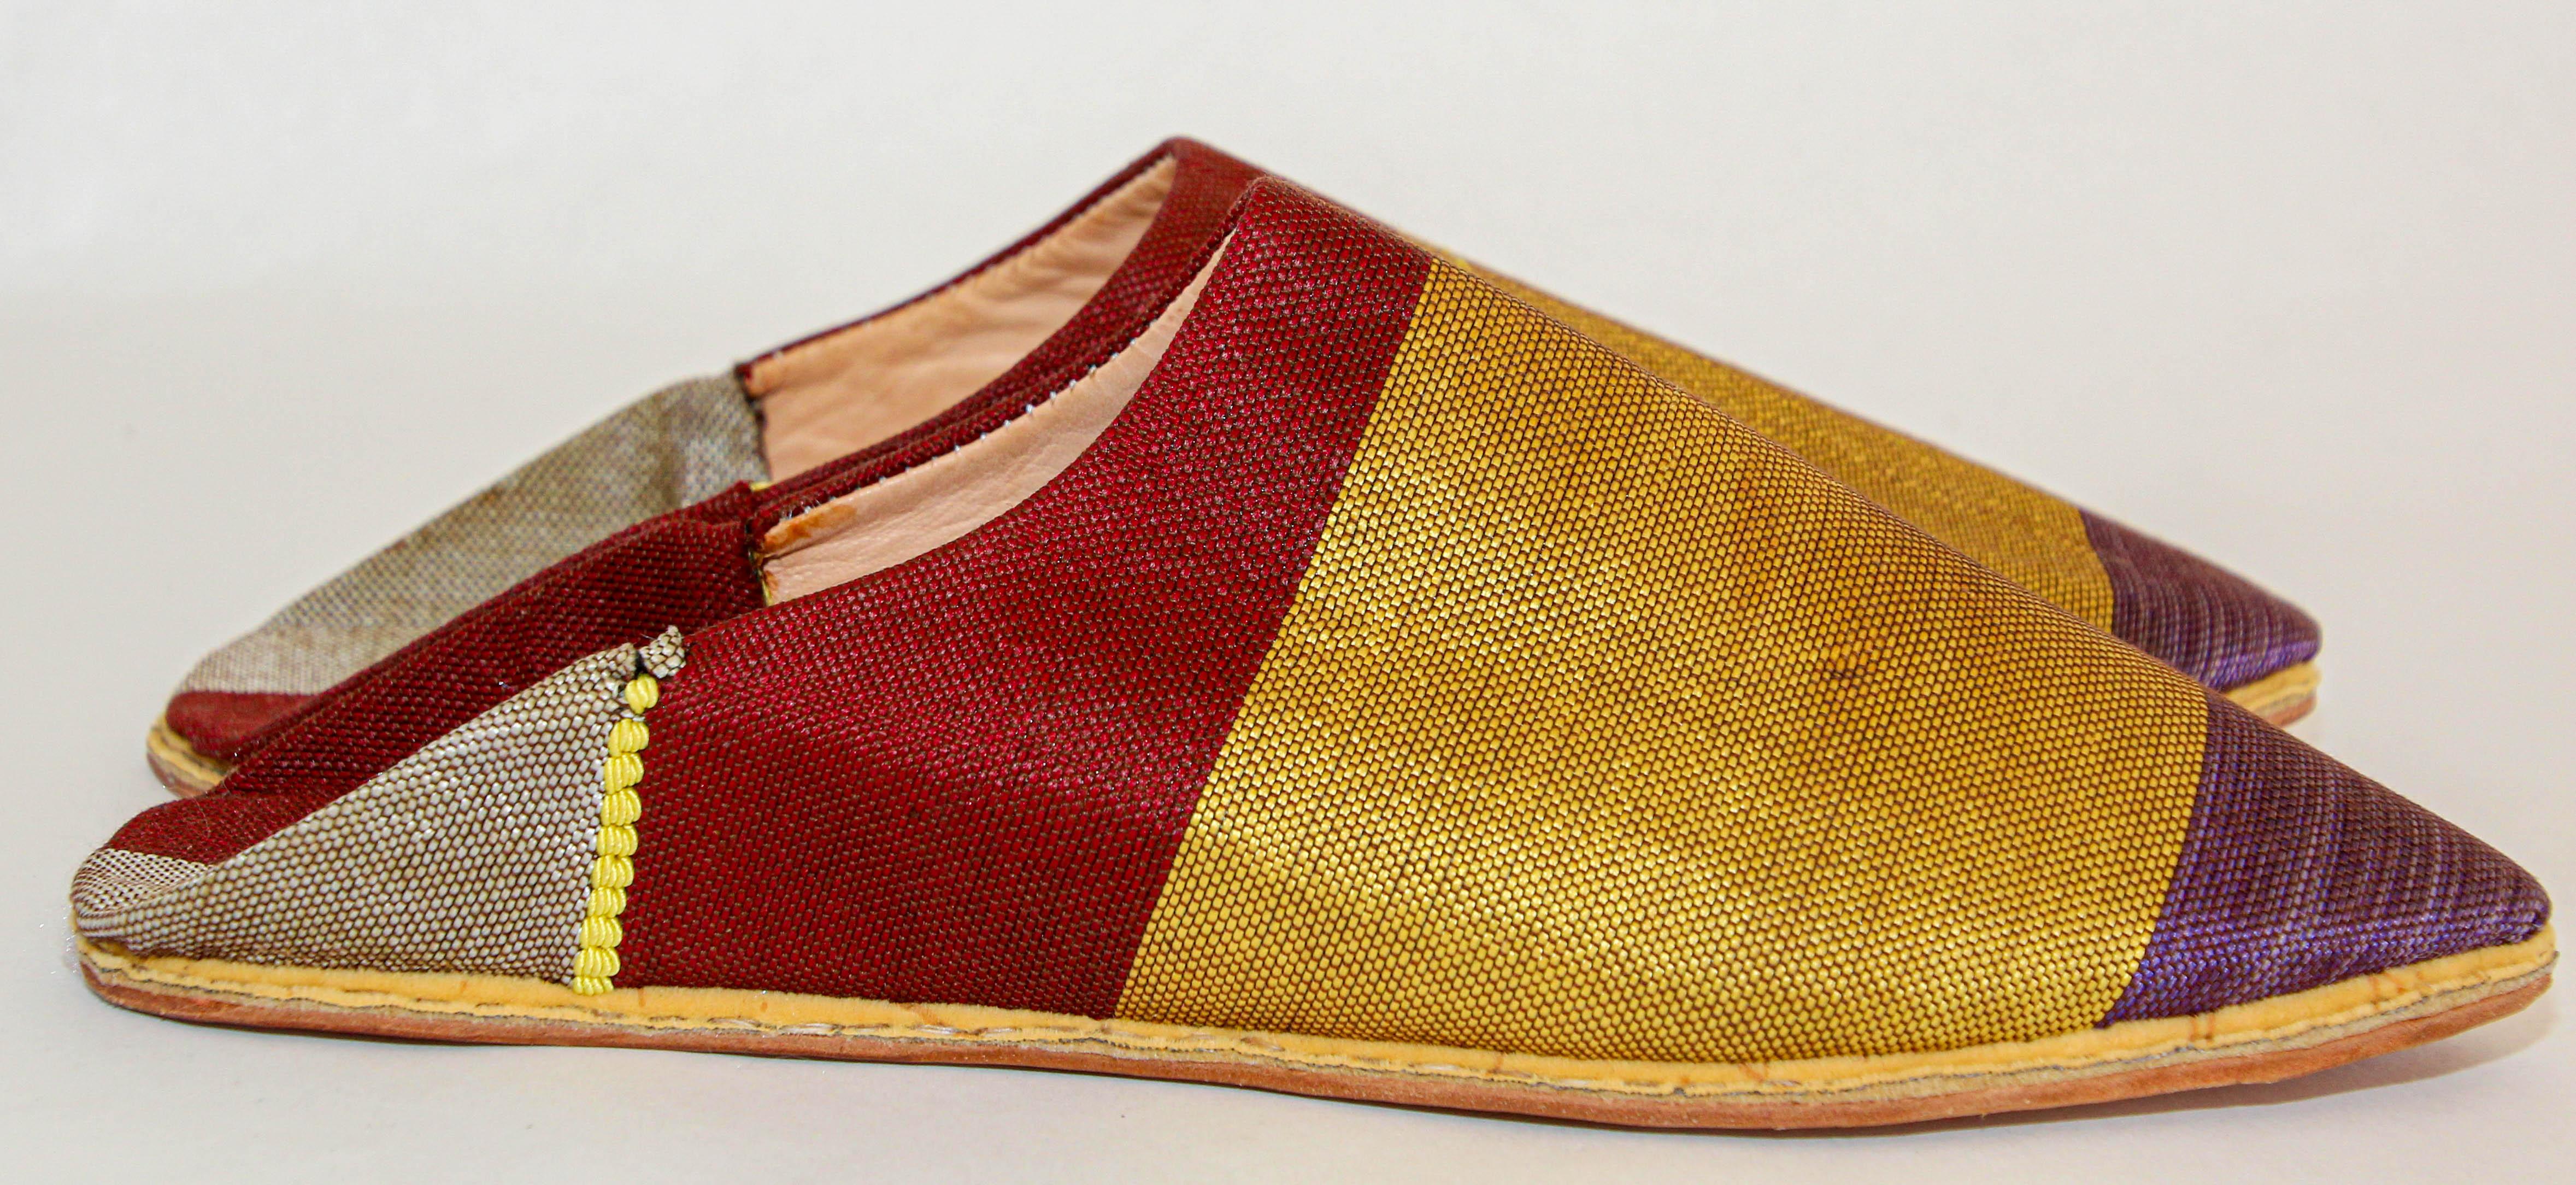 Moroccan Silk Slippers Babouches, chic and soft.
These Moroccan silk slippers are handmade to perfection the inside sole is crafted of soft leather, hand-sewn leather sole.
You won't want to take the Moroccan babouches off your feet!
Moroccan